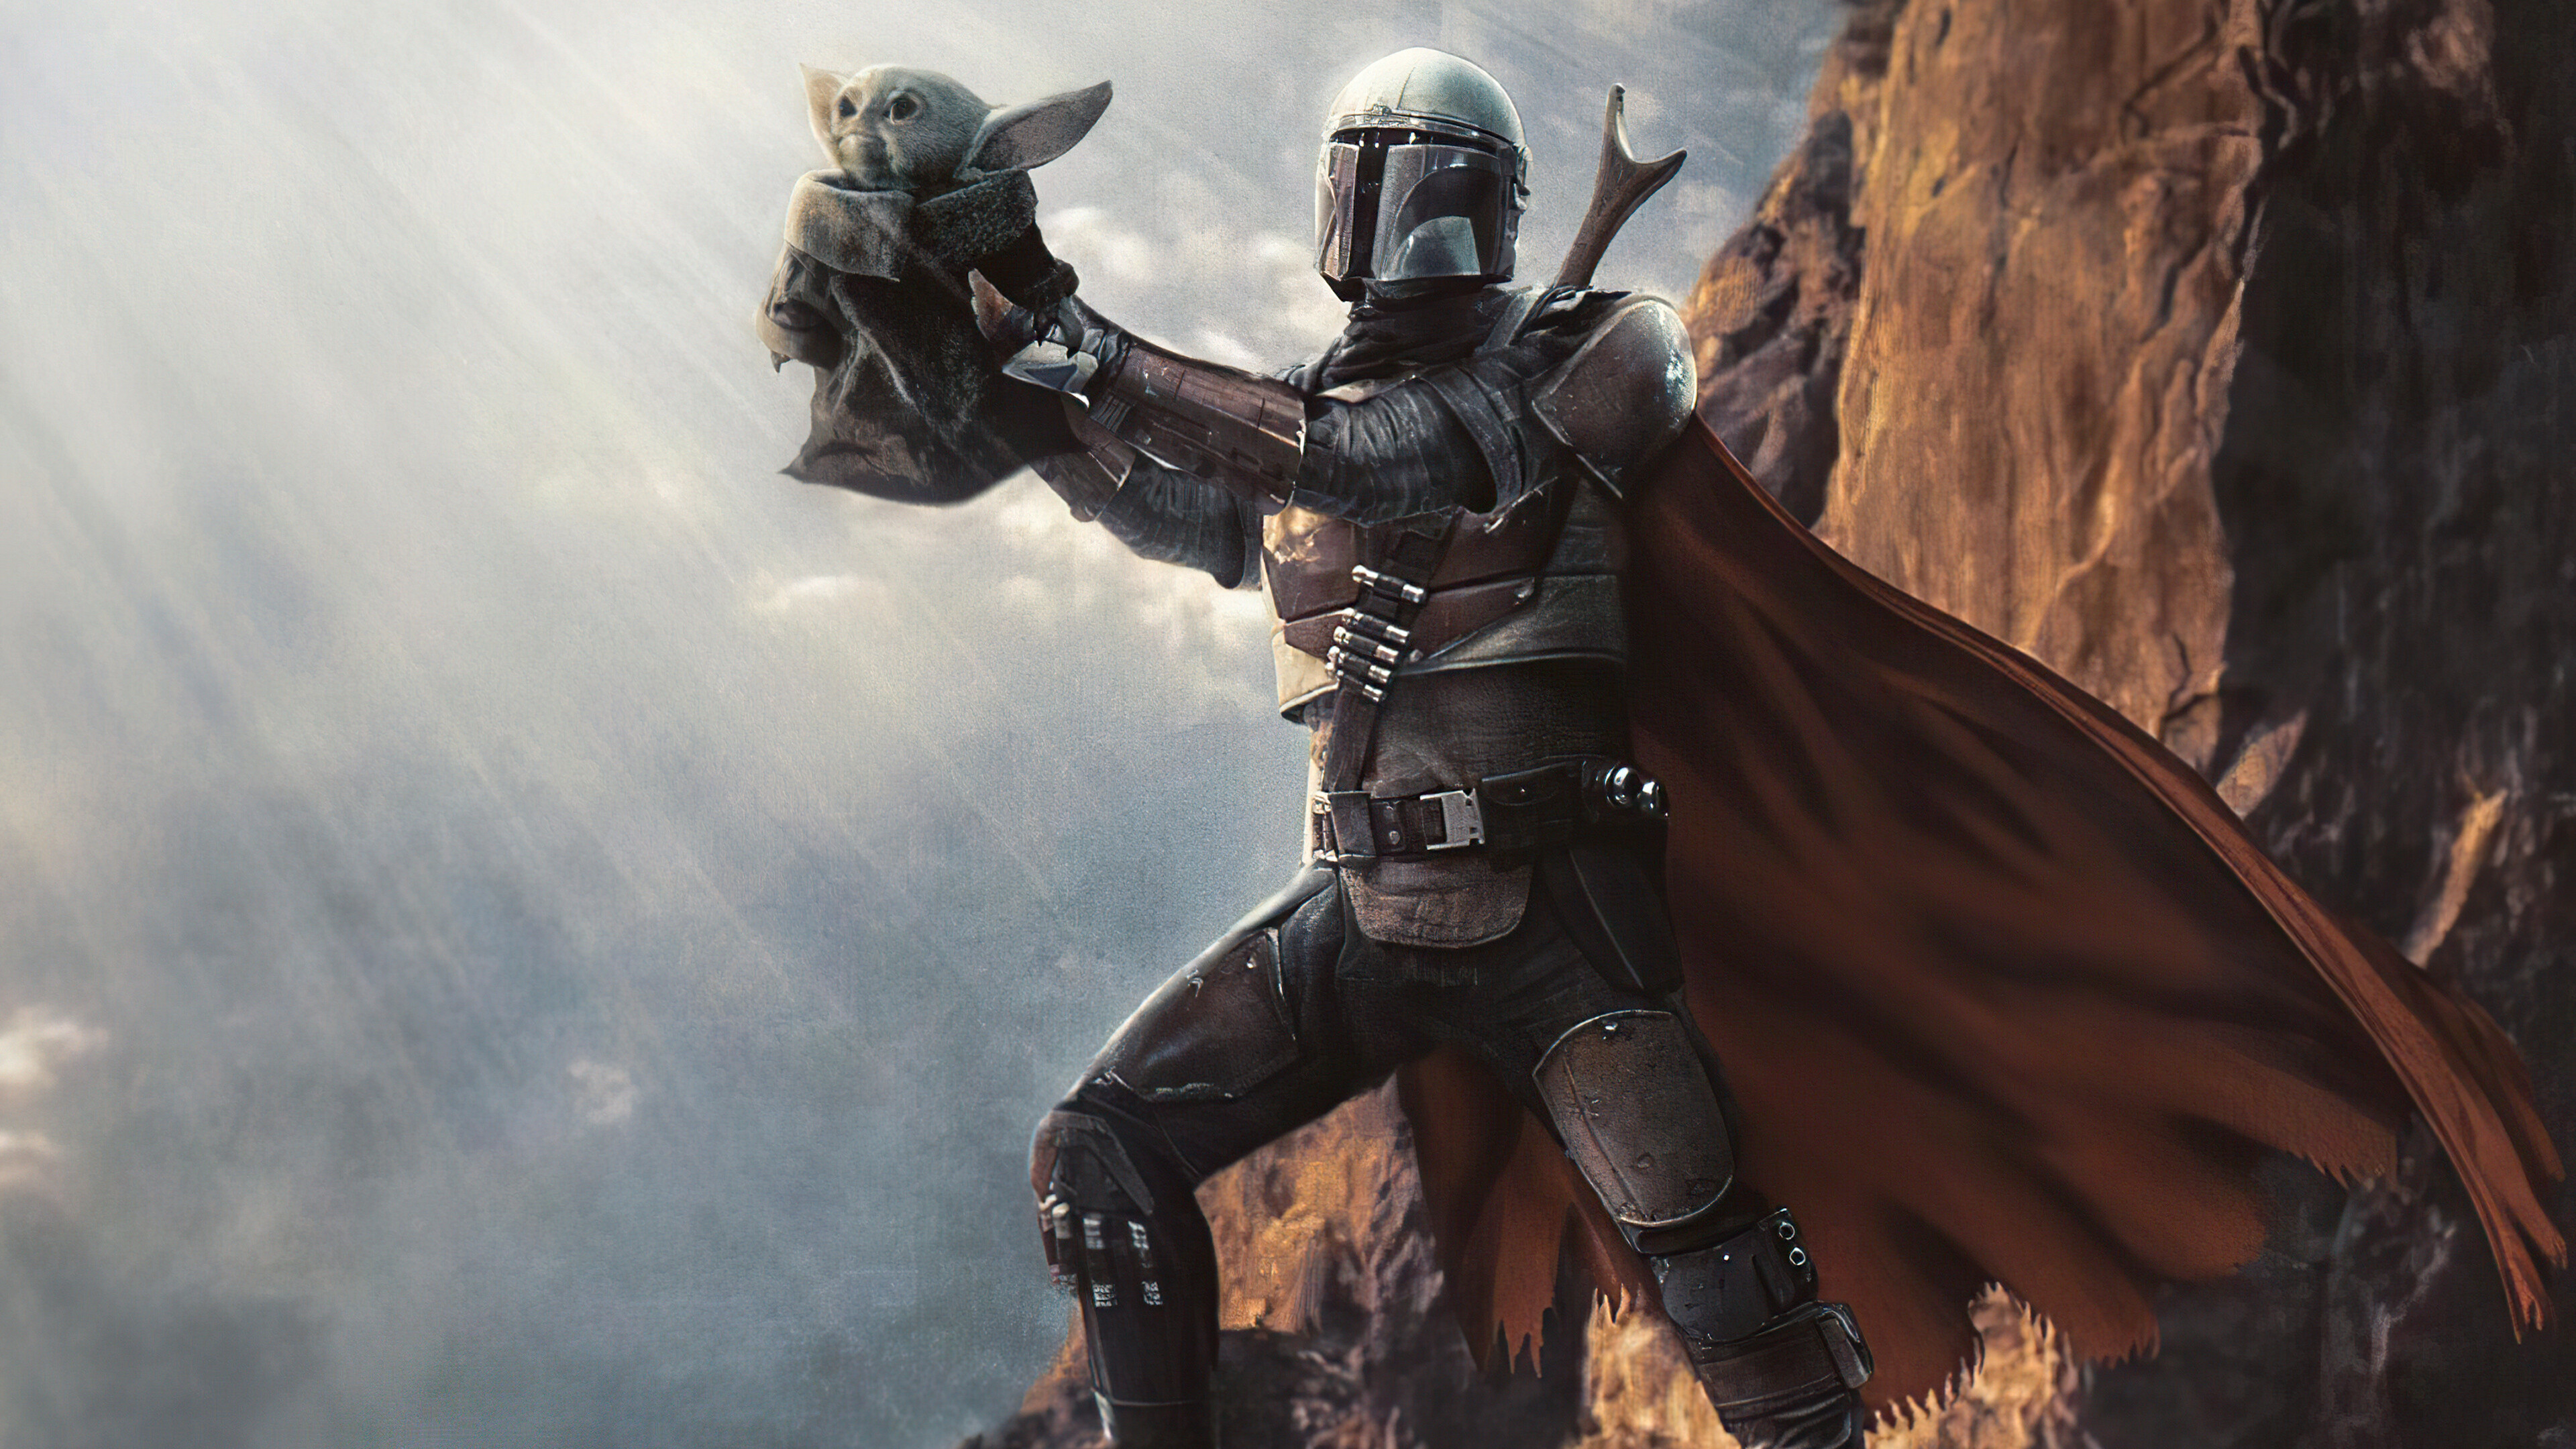 The Mandalorian: An infant of the same species as Yoda, created with animatronics and puppetry. 3840x2160 4K Wallpaper.